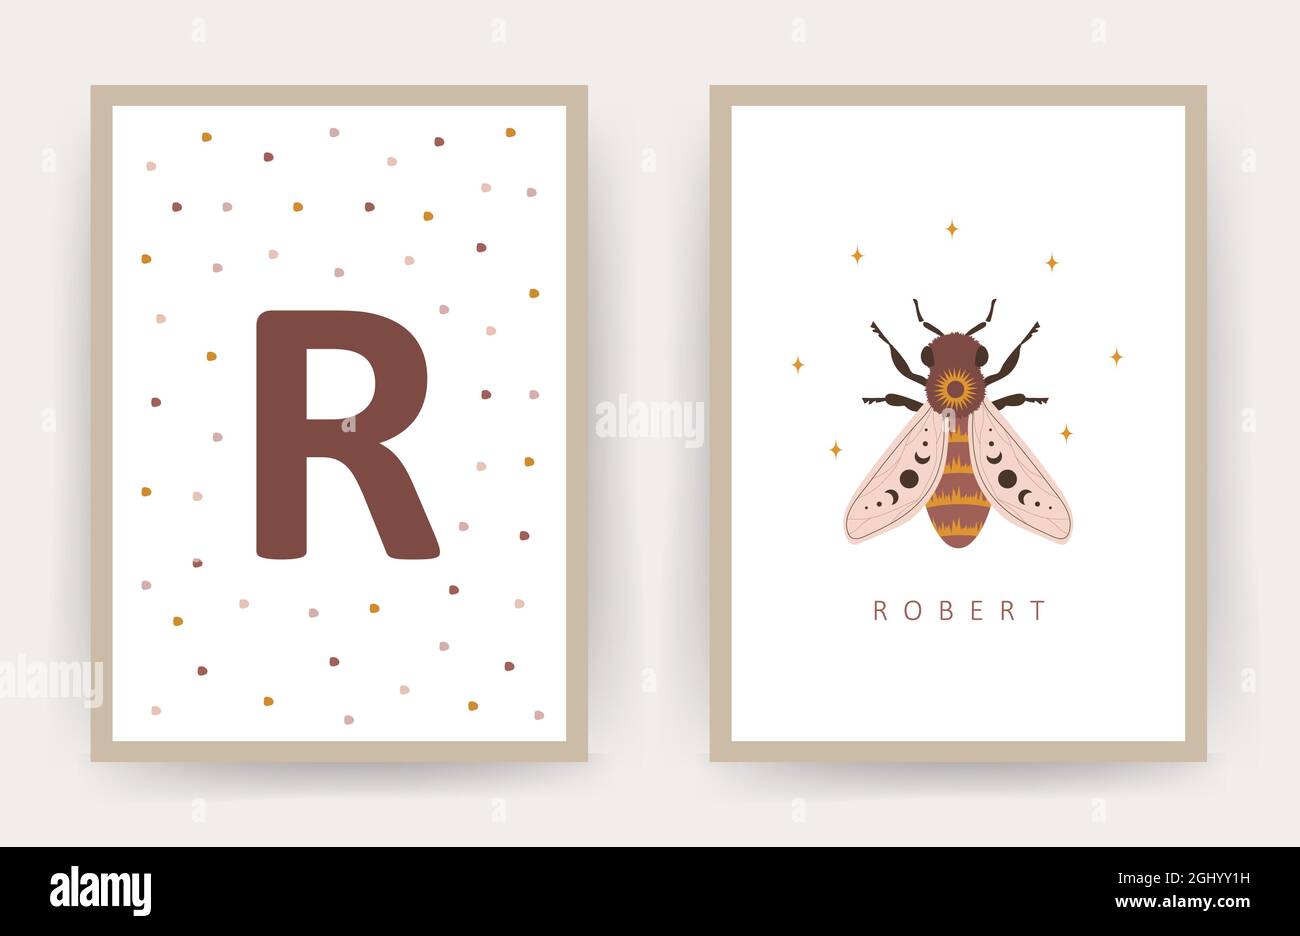 https://c8.alamy.com/comp/2GHYY1H/boho-honeybee-posters-with-kid-name-scandinavian-design-for-children-room-wall-decor-cute-pastel-vector-illustration-in-cartoon-style-2GHYY1H.jpg